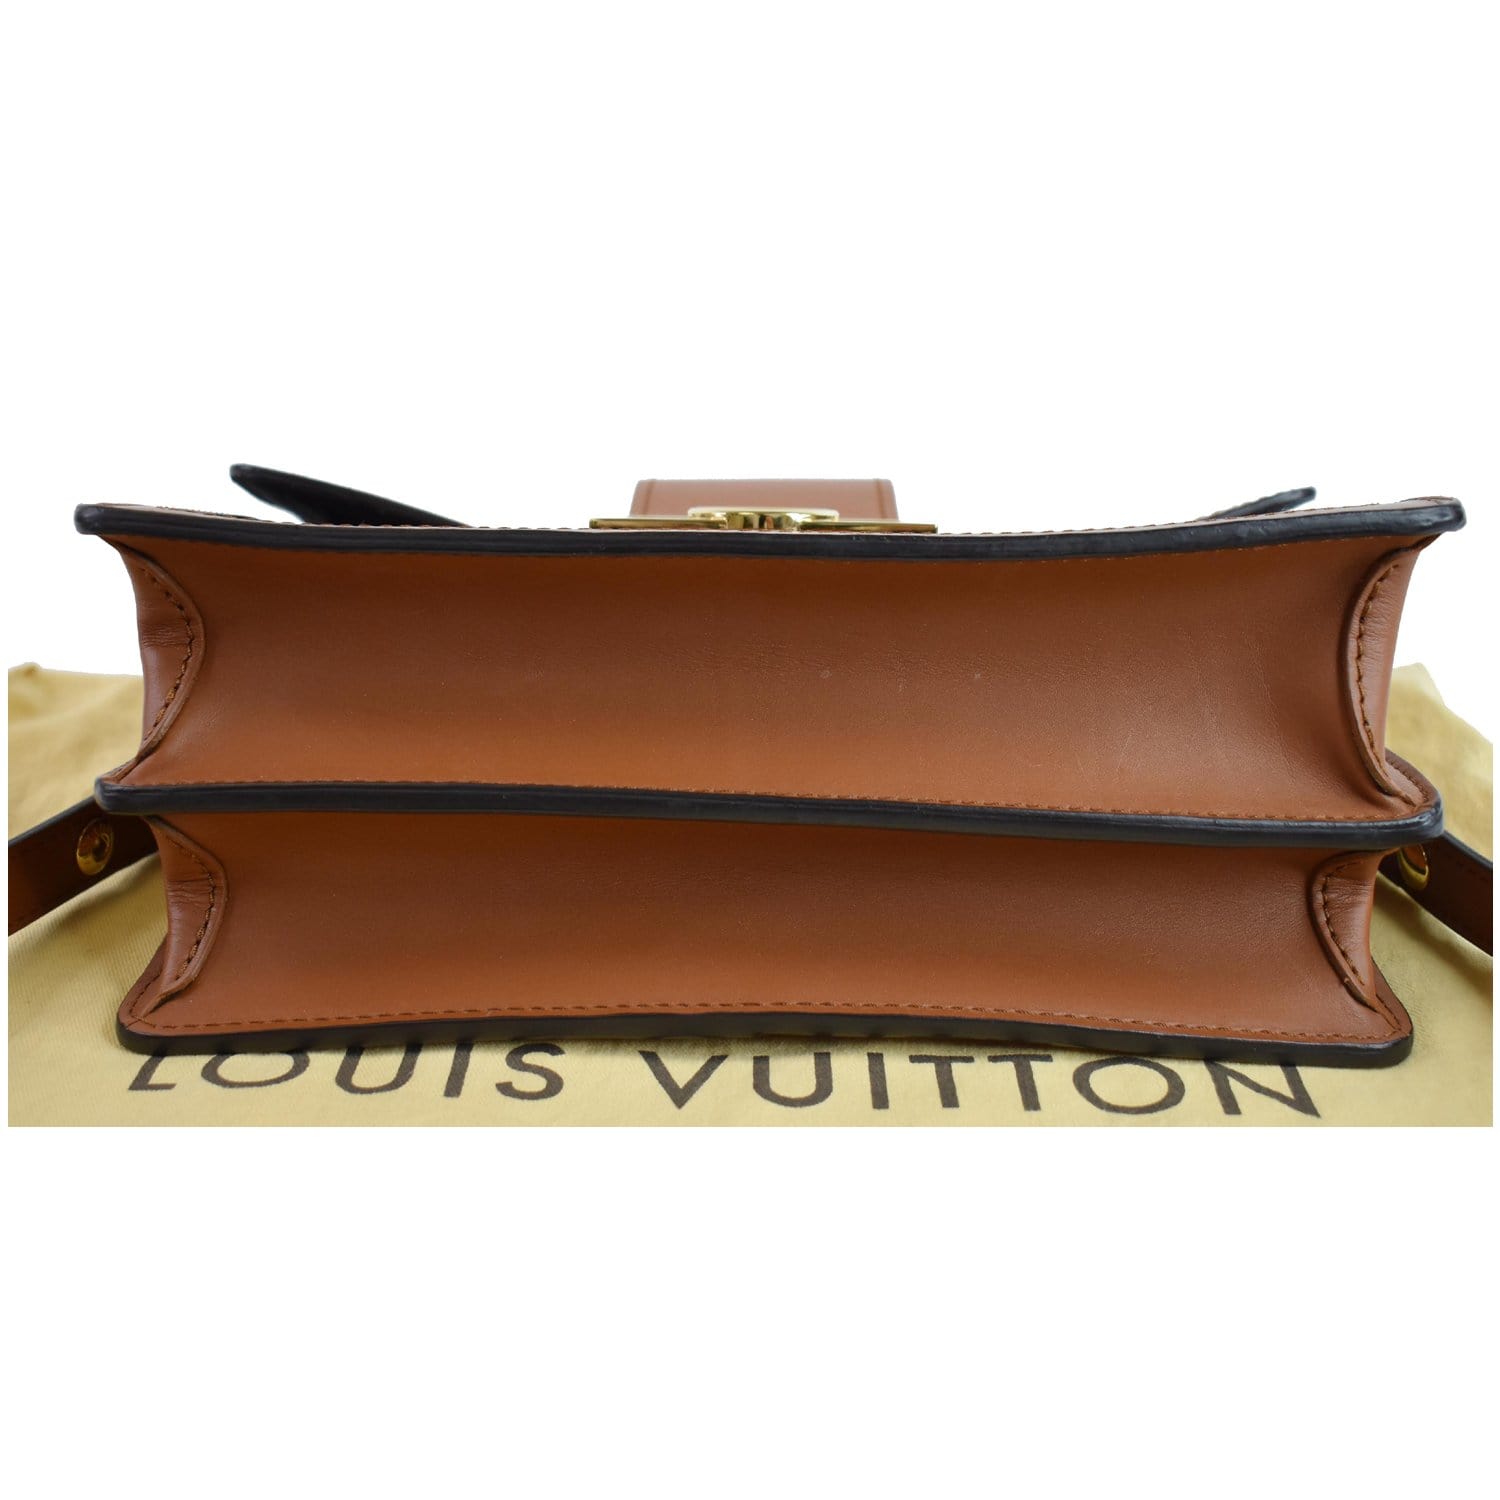 Louis Vuitton - Authenticated Dauphine Purse - Leather Brown for Women, Never Worn